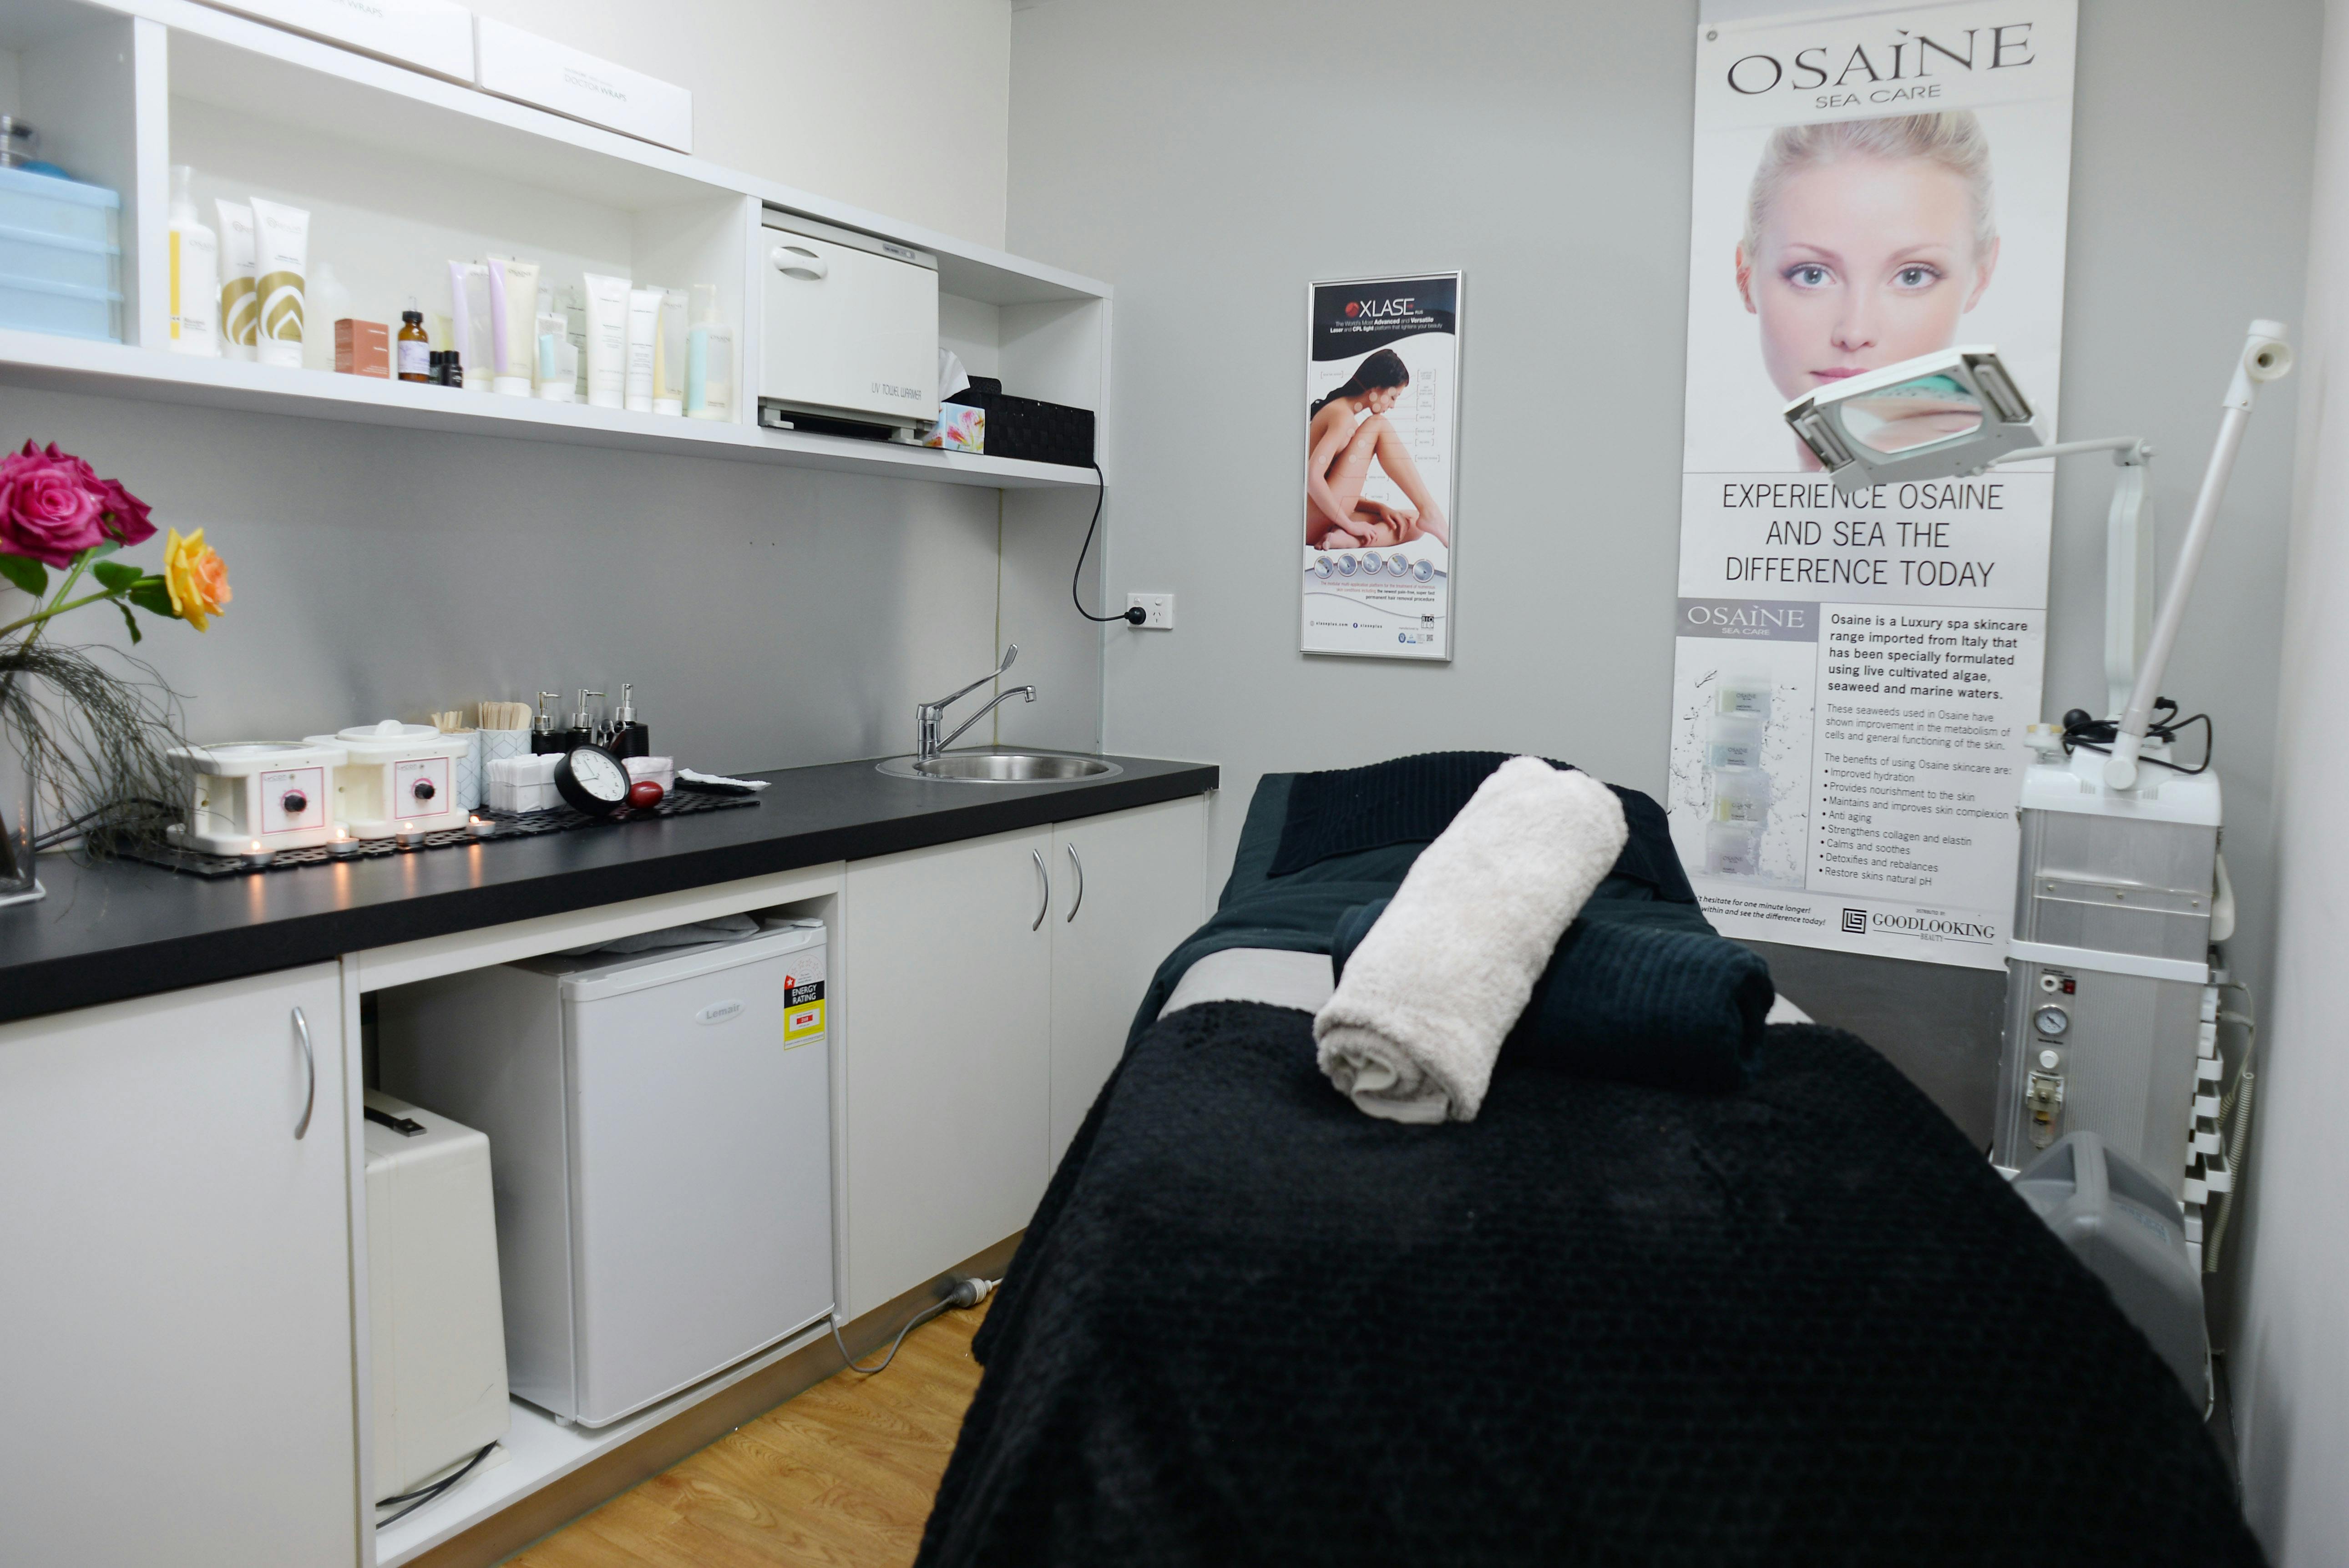 Top 20 Laser Hair Removal Clinics in Sydney | Bookwell